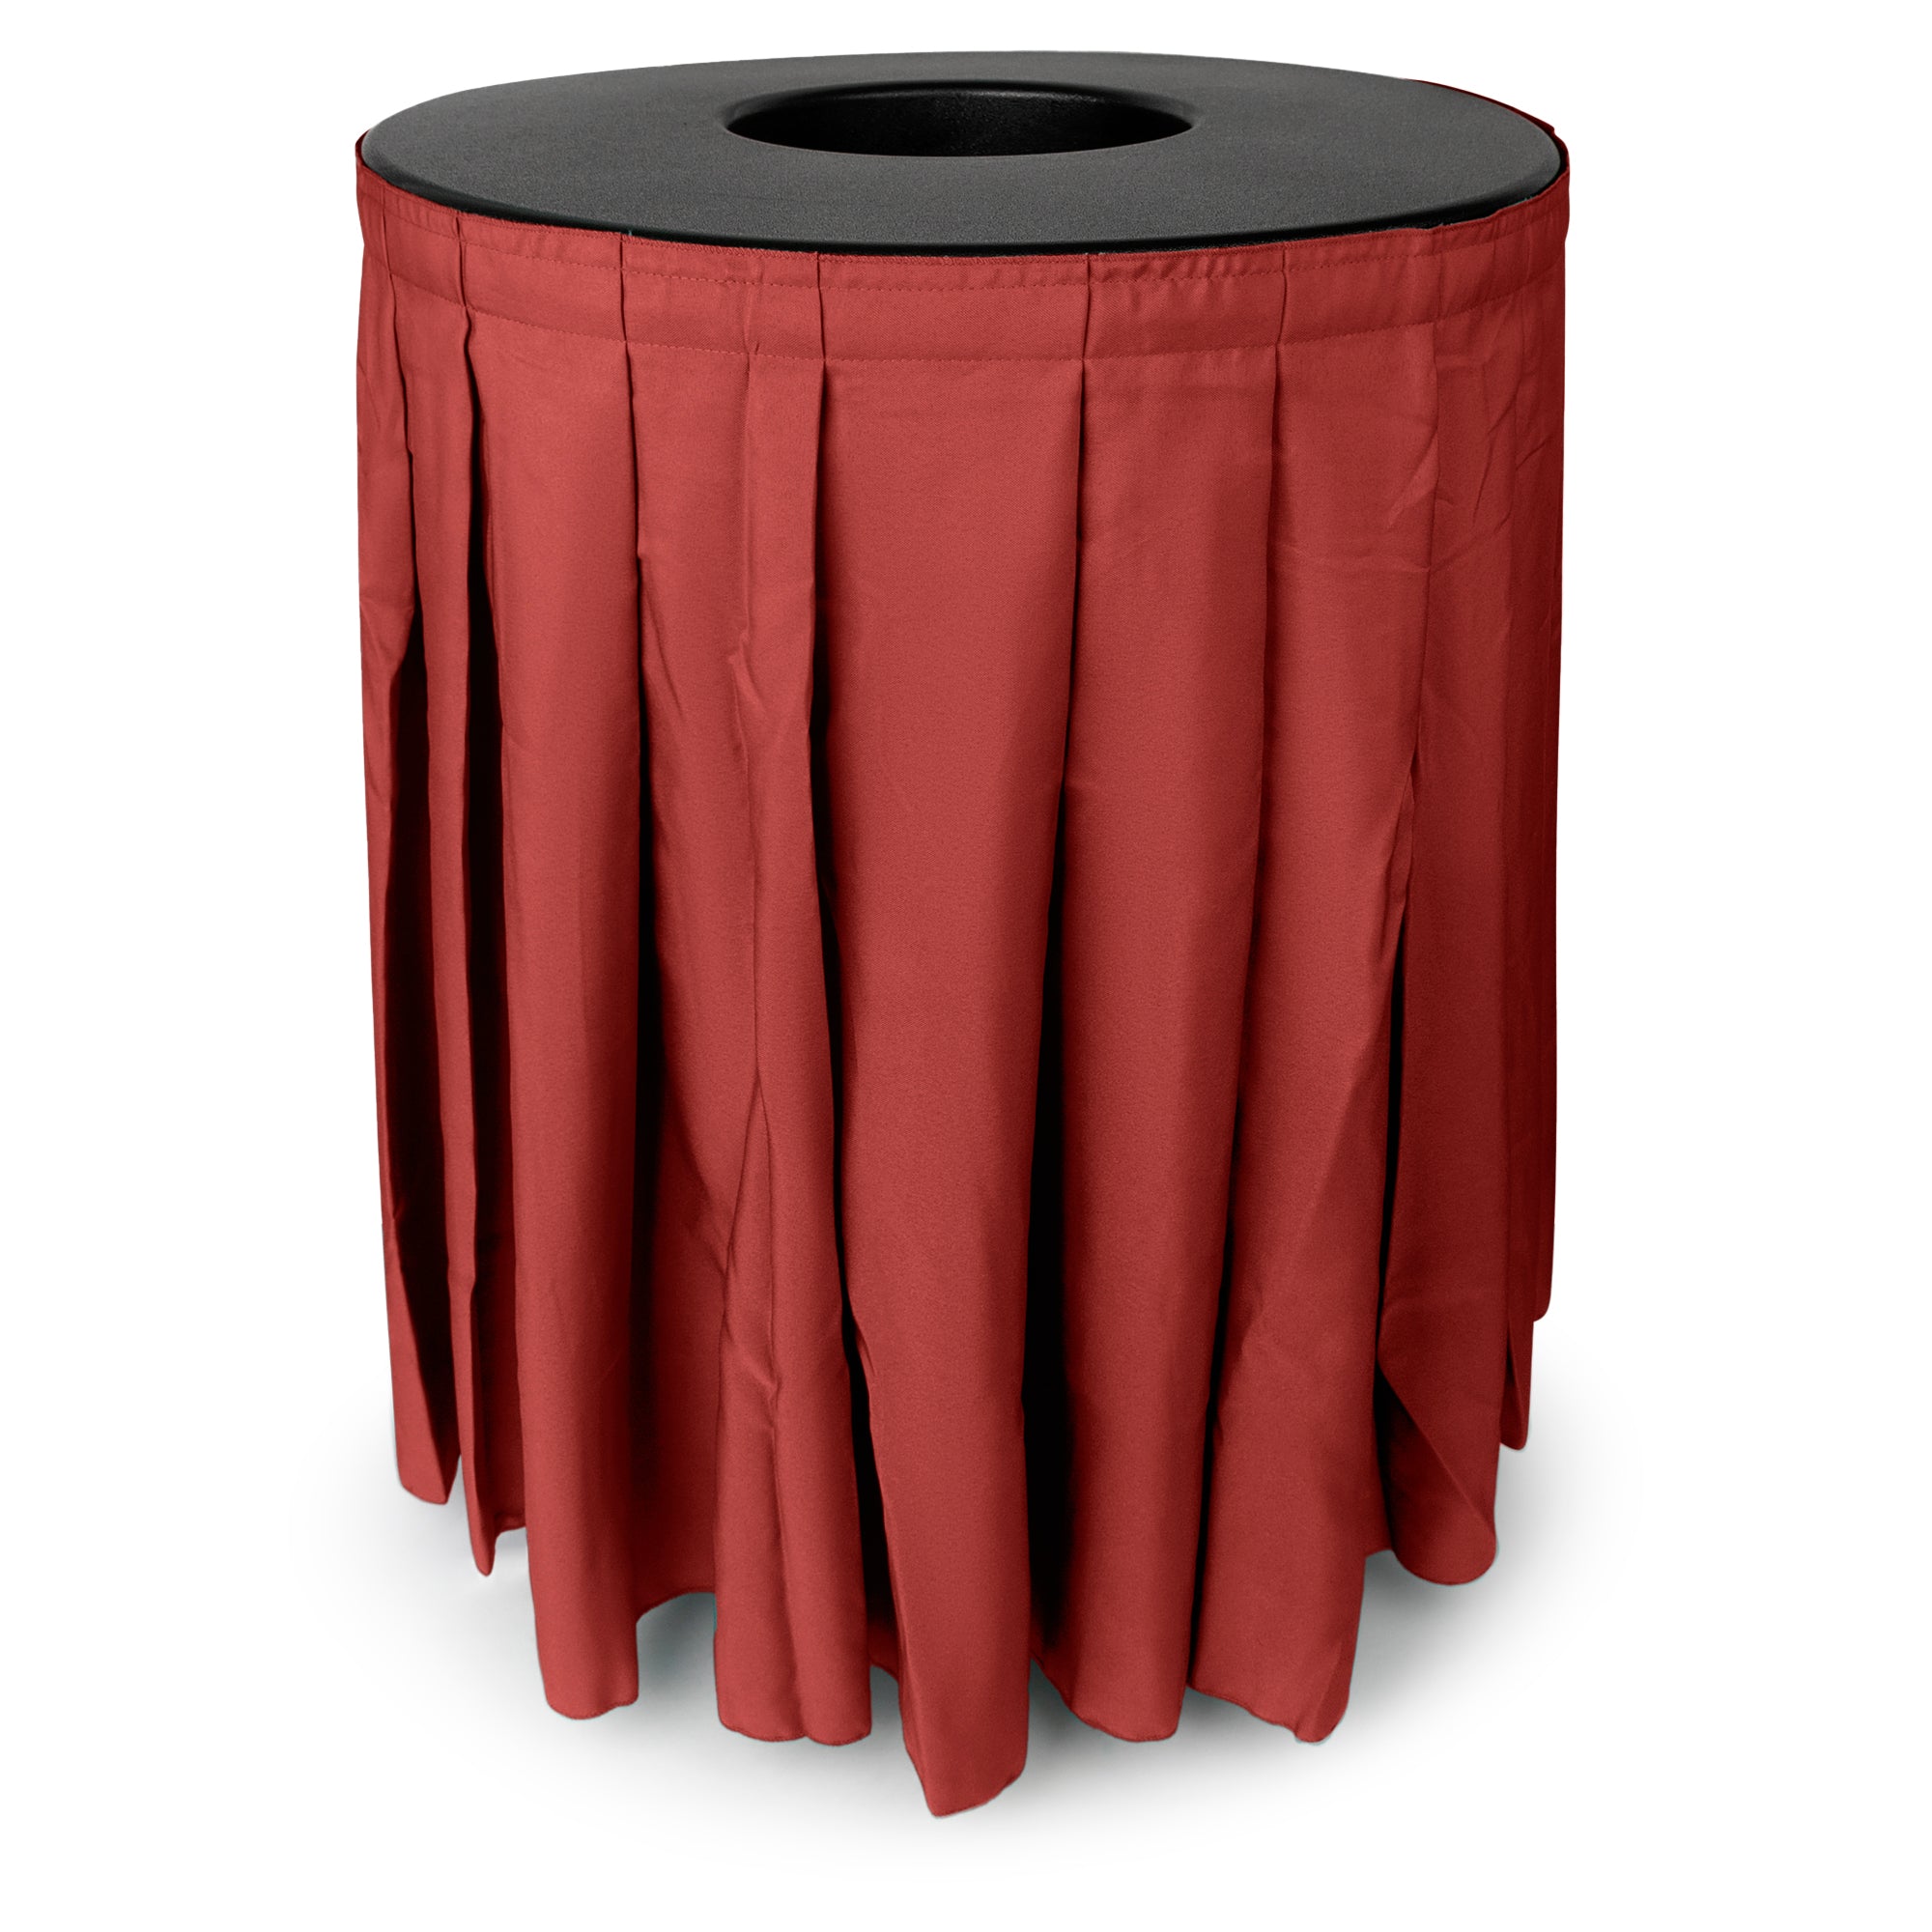 Round Black Garbage Can Cover - Solid Pleated Skirt Topper for 32-35 Gallon Indoor Garbage Cans Trash Bins, Waste Container Without Wheels - Ideal for Birthday Party, Events, Residential Use